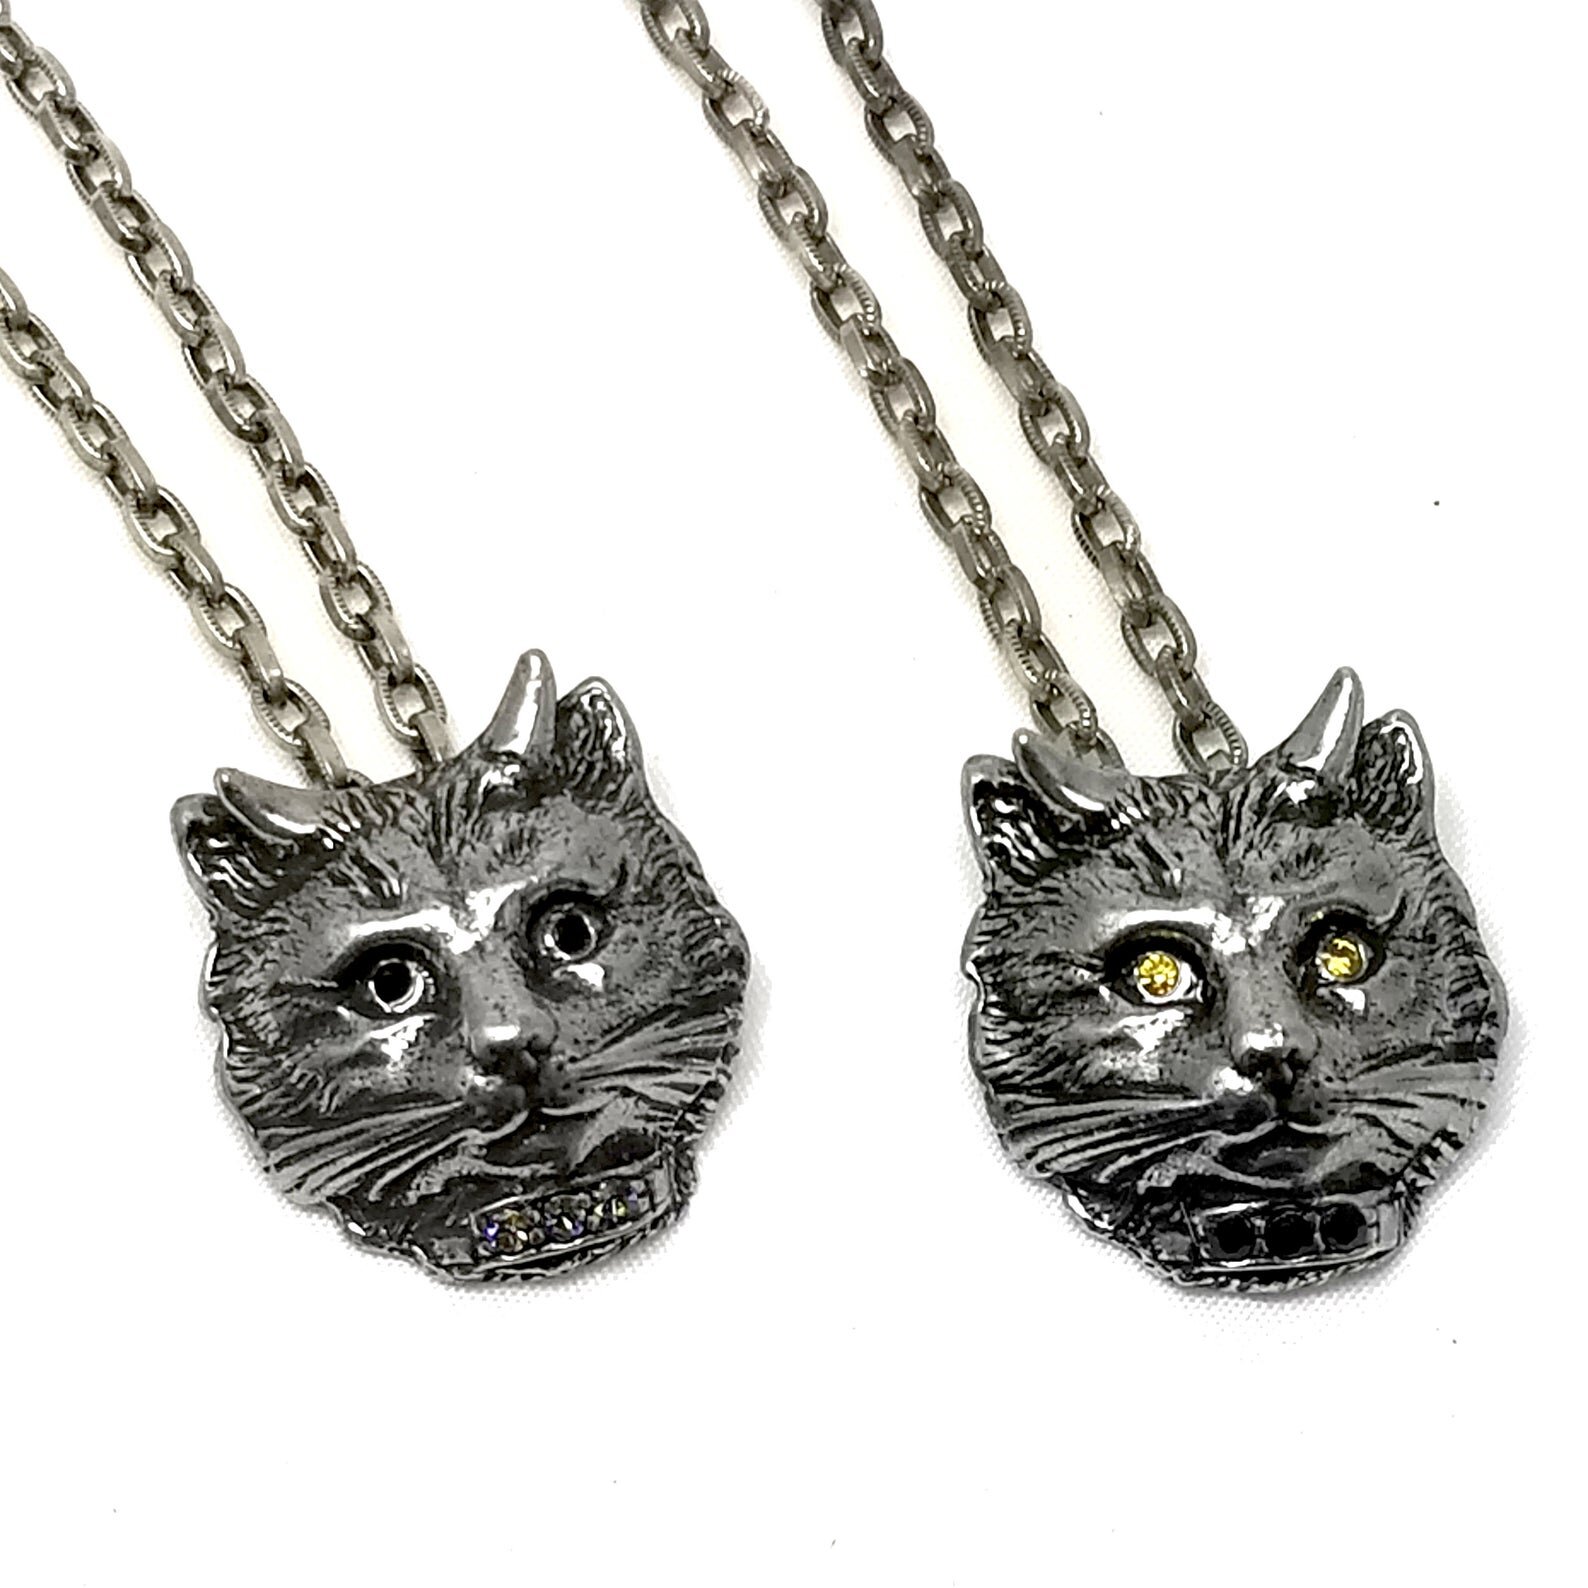 Buy BLACK Cat Necklace for Women, Peeking Cat Necklace, Cat Jewelry Gift, Black  Cat Pendant, Cat Lover Gifts, Jewelry With a Cat Online in India - Etsy